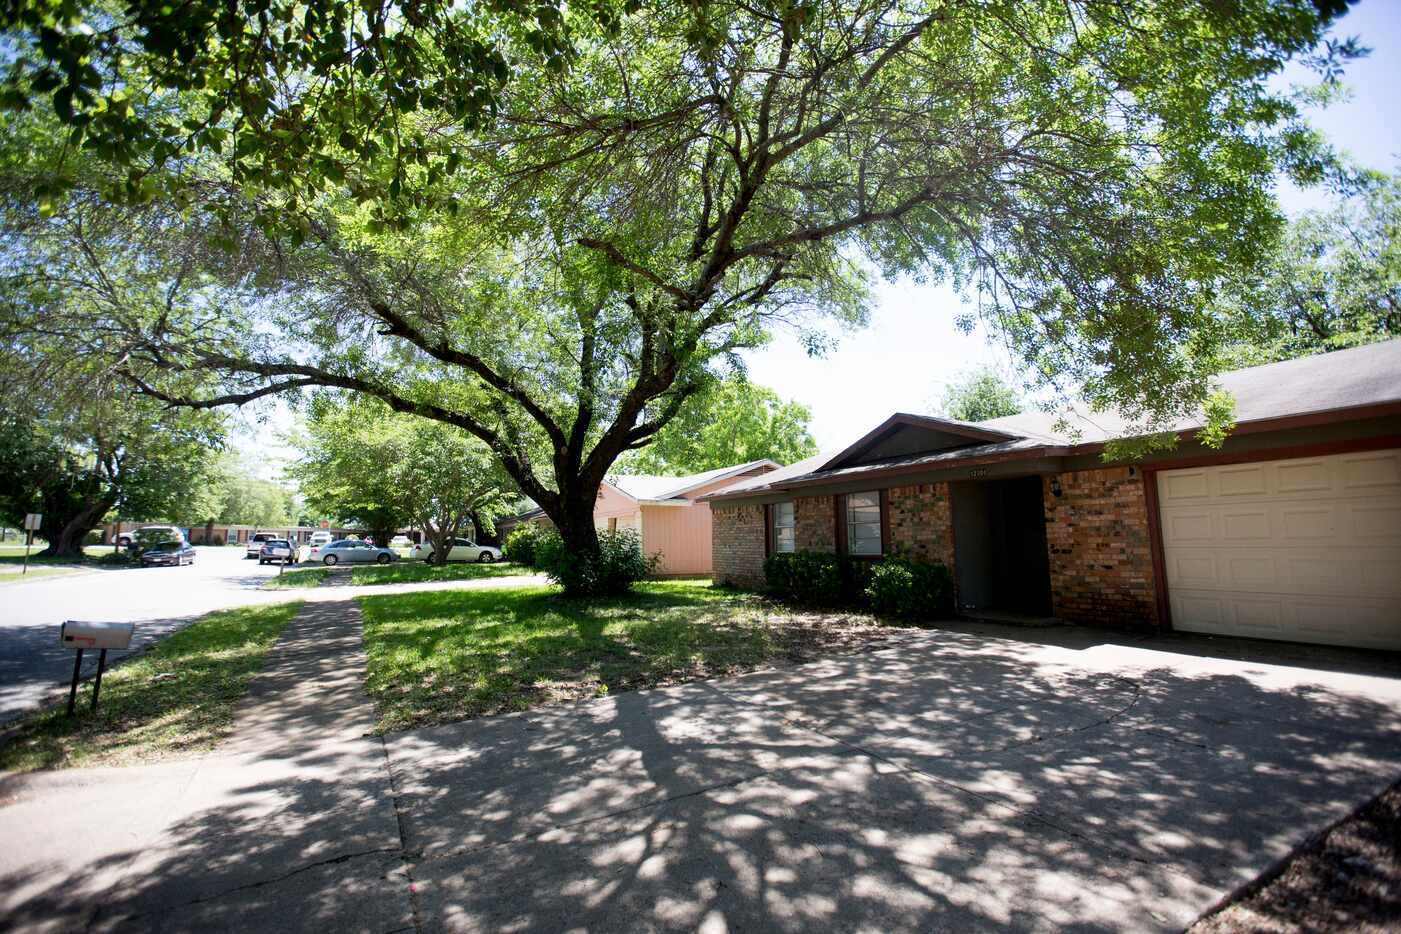 The home where 15-year-old Jordan Edwards attended a party before he was fatally shot in the...